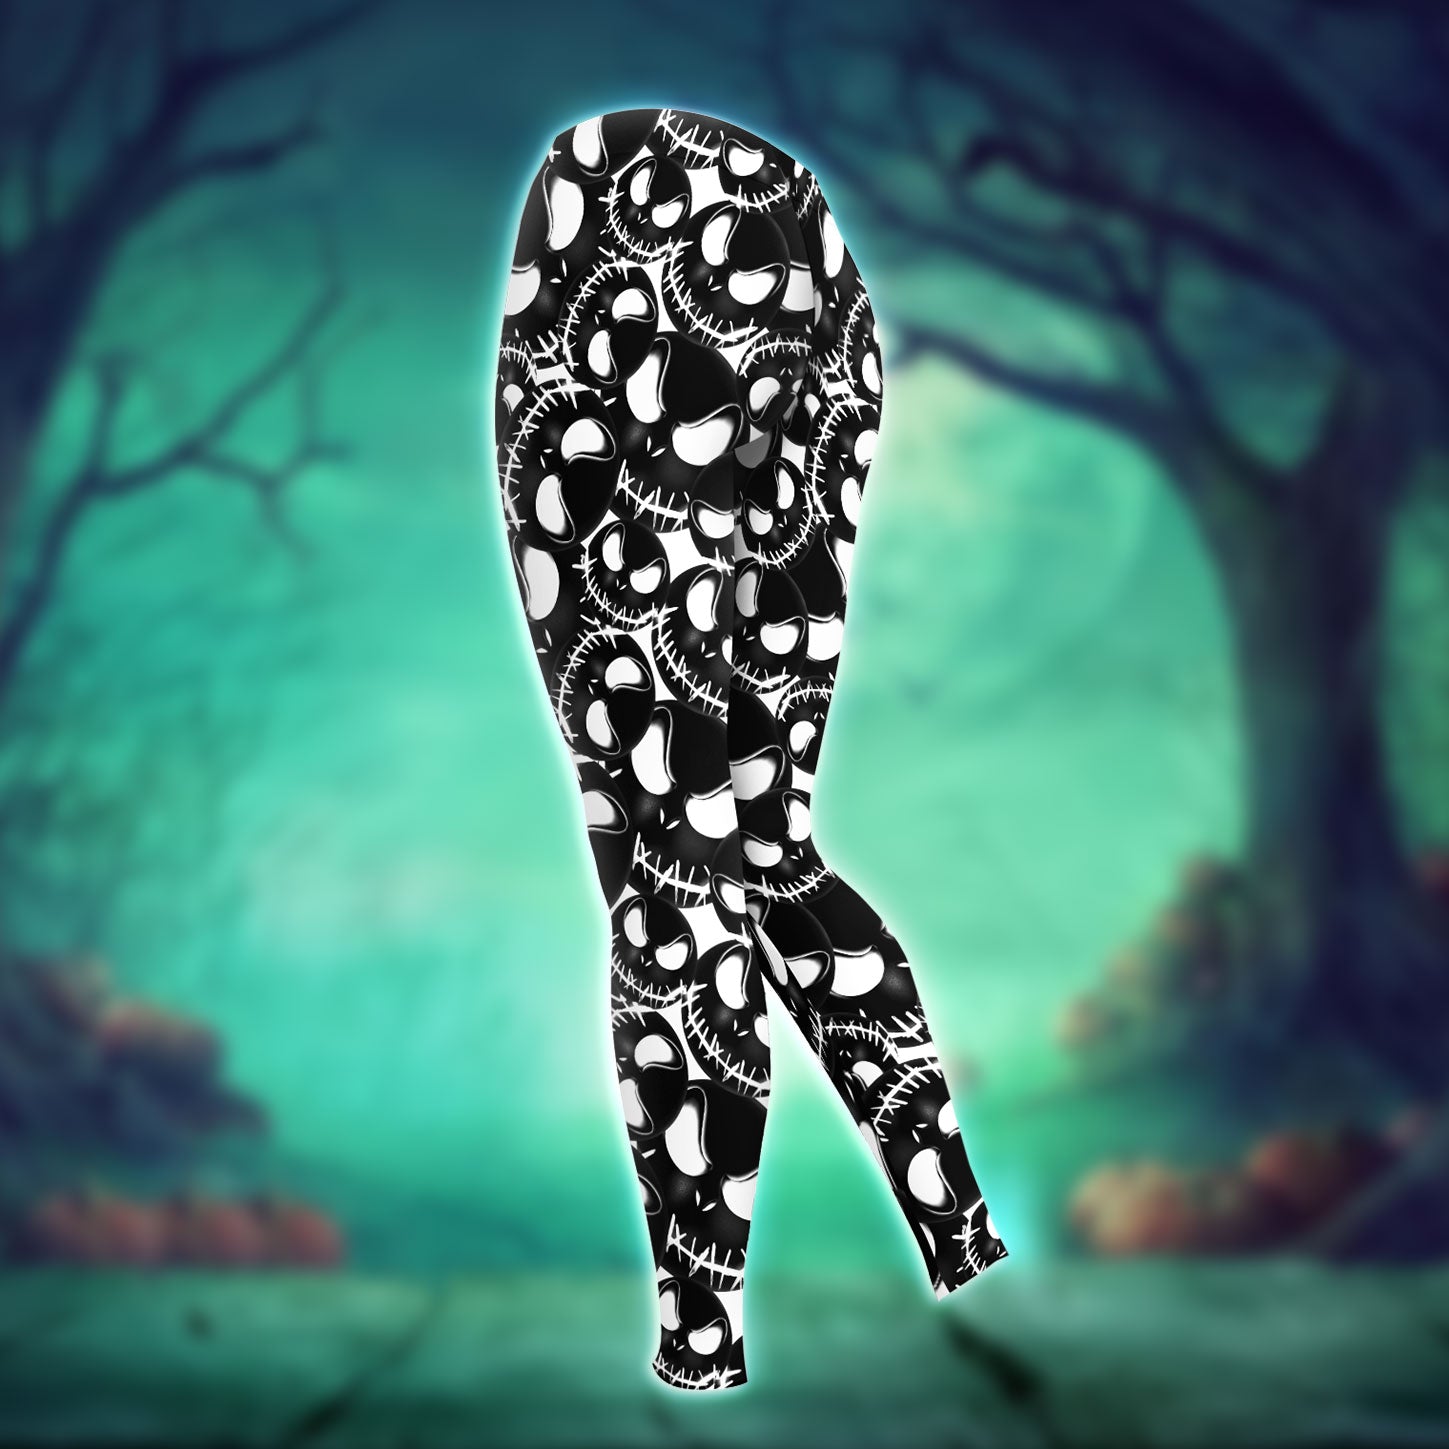 Cool Little Nightmare Combo Hoodie and Leggings - Dark and edgy matching set with skull designs for a unique and stylish look.